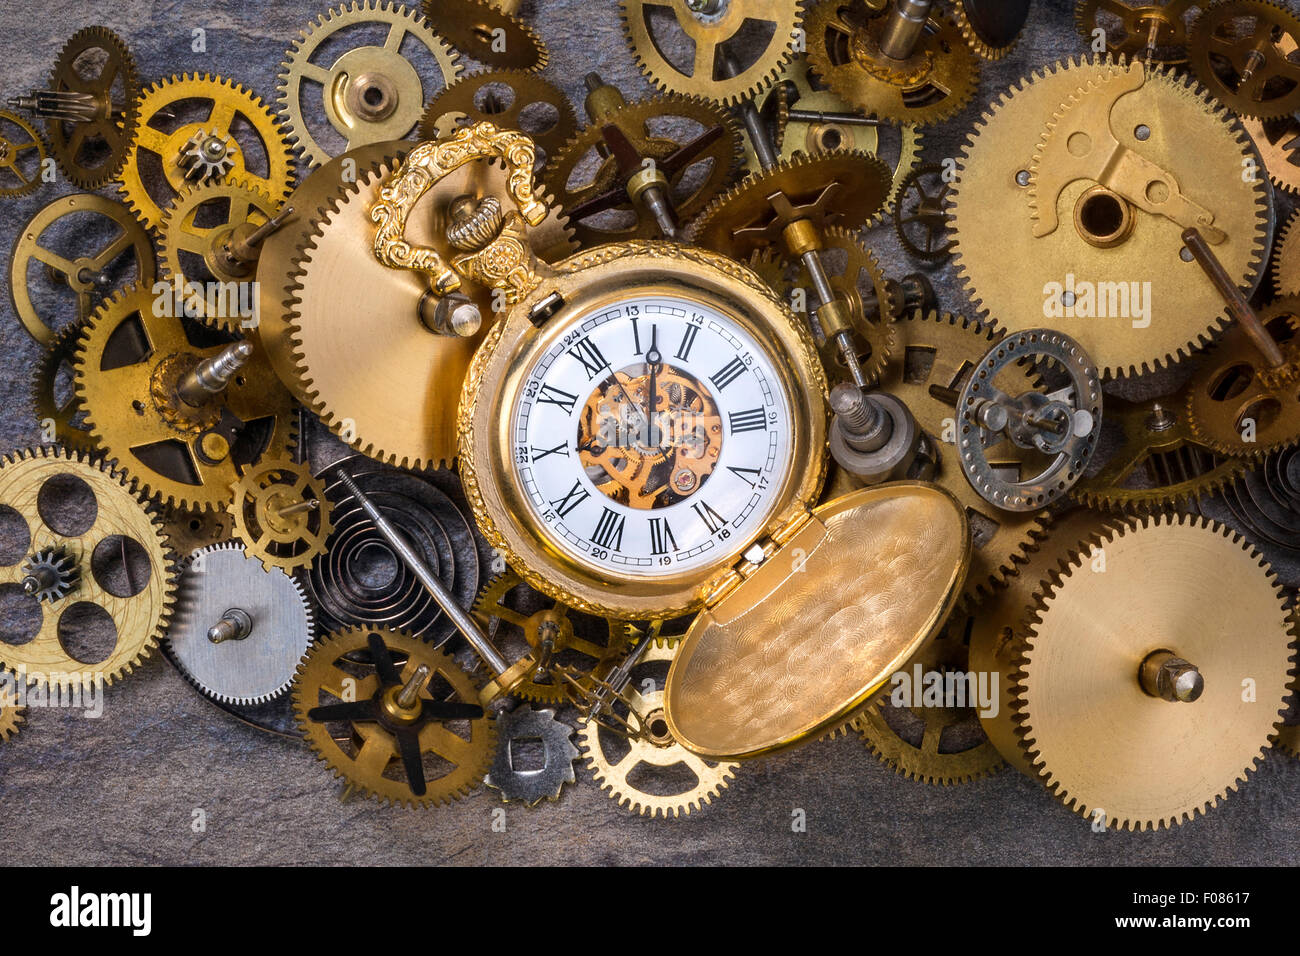 Pocket watch and a selection of dusty old brass clock parts. Stock Photo